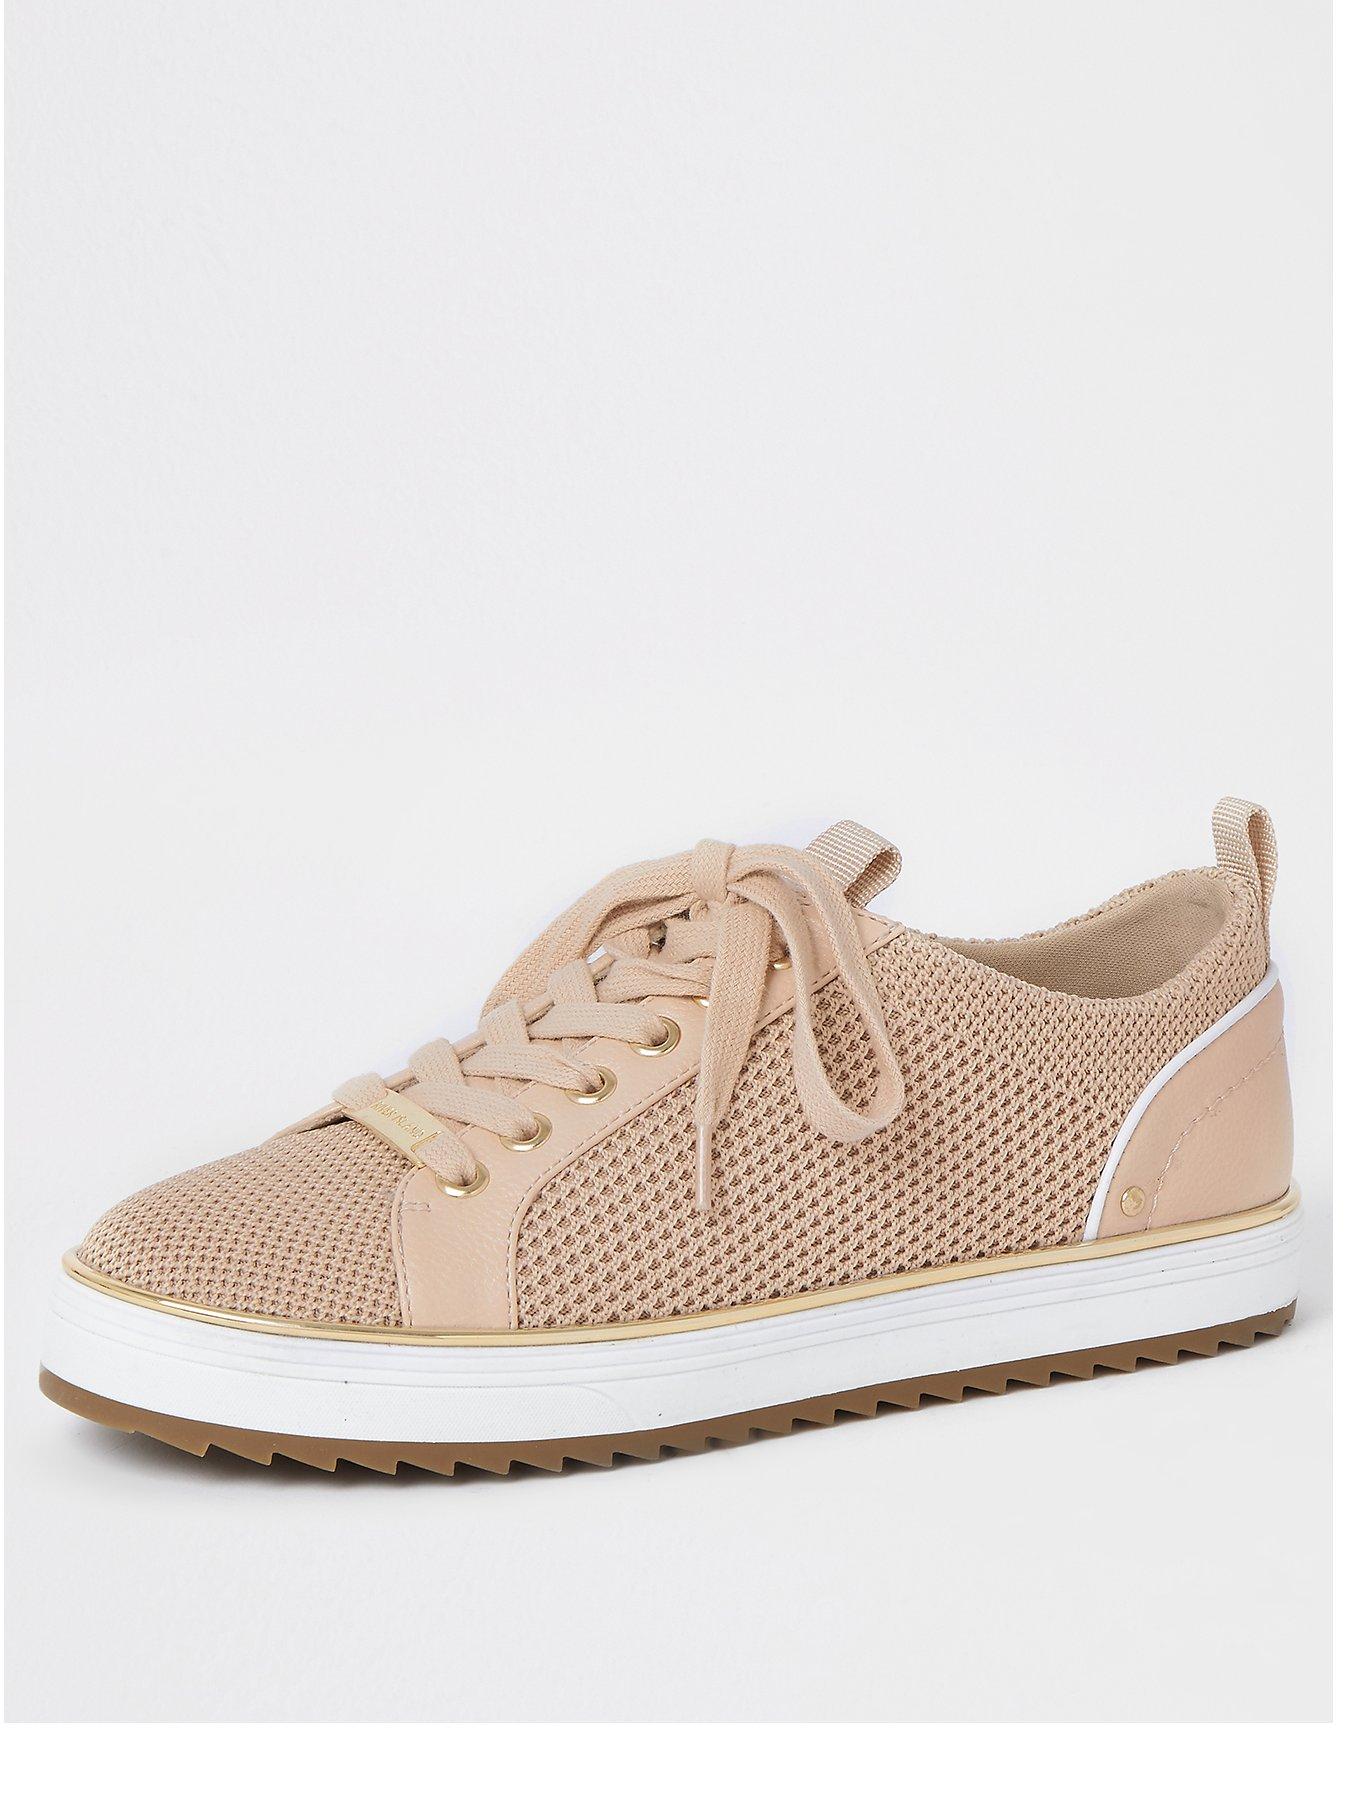 river island pink shoes